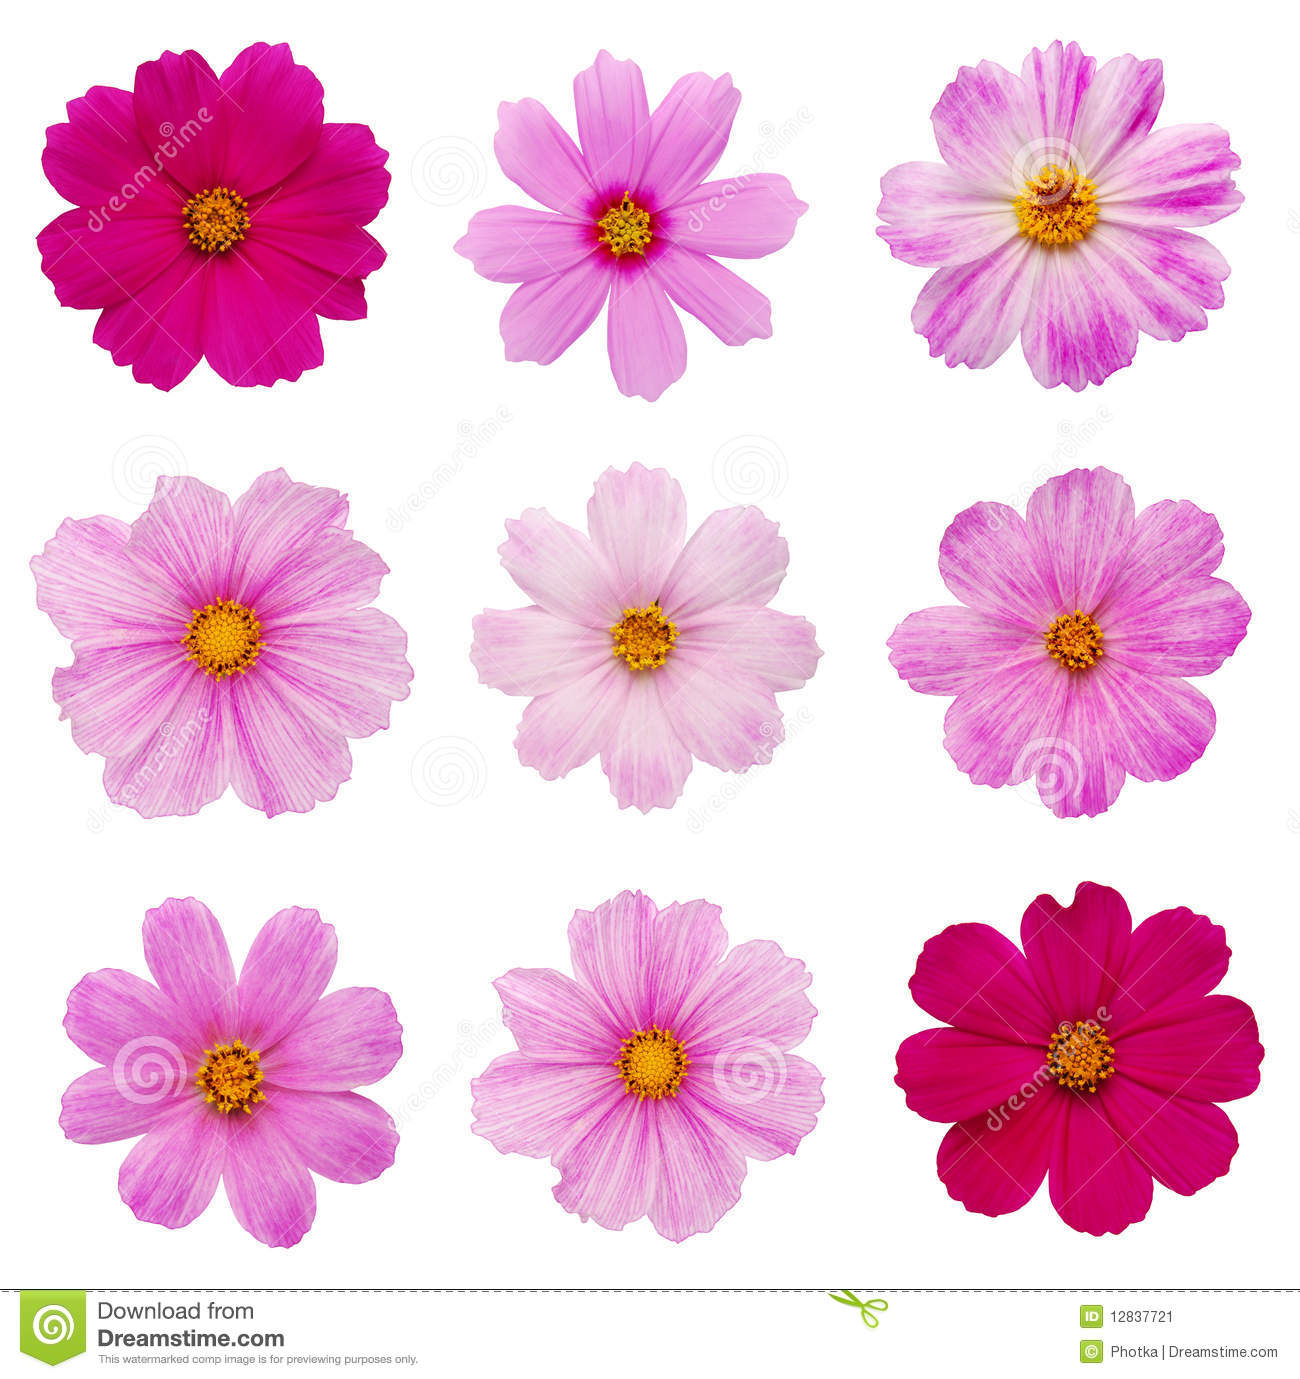 clipart of cosmos flower - photo #4